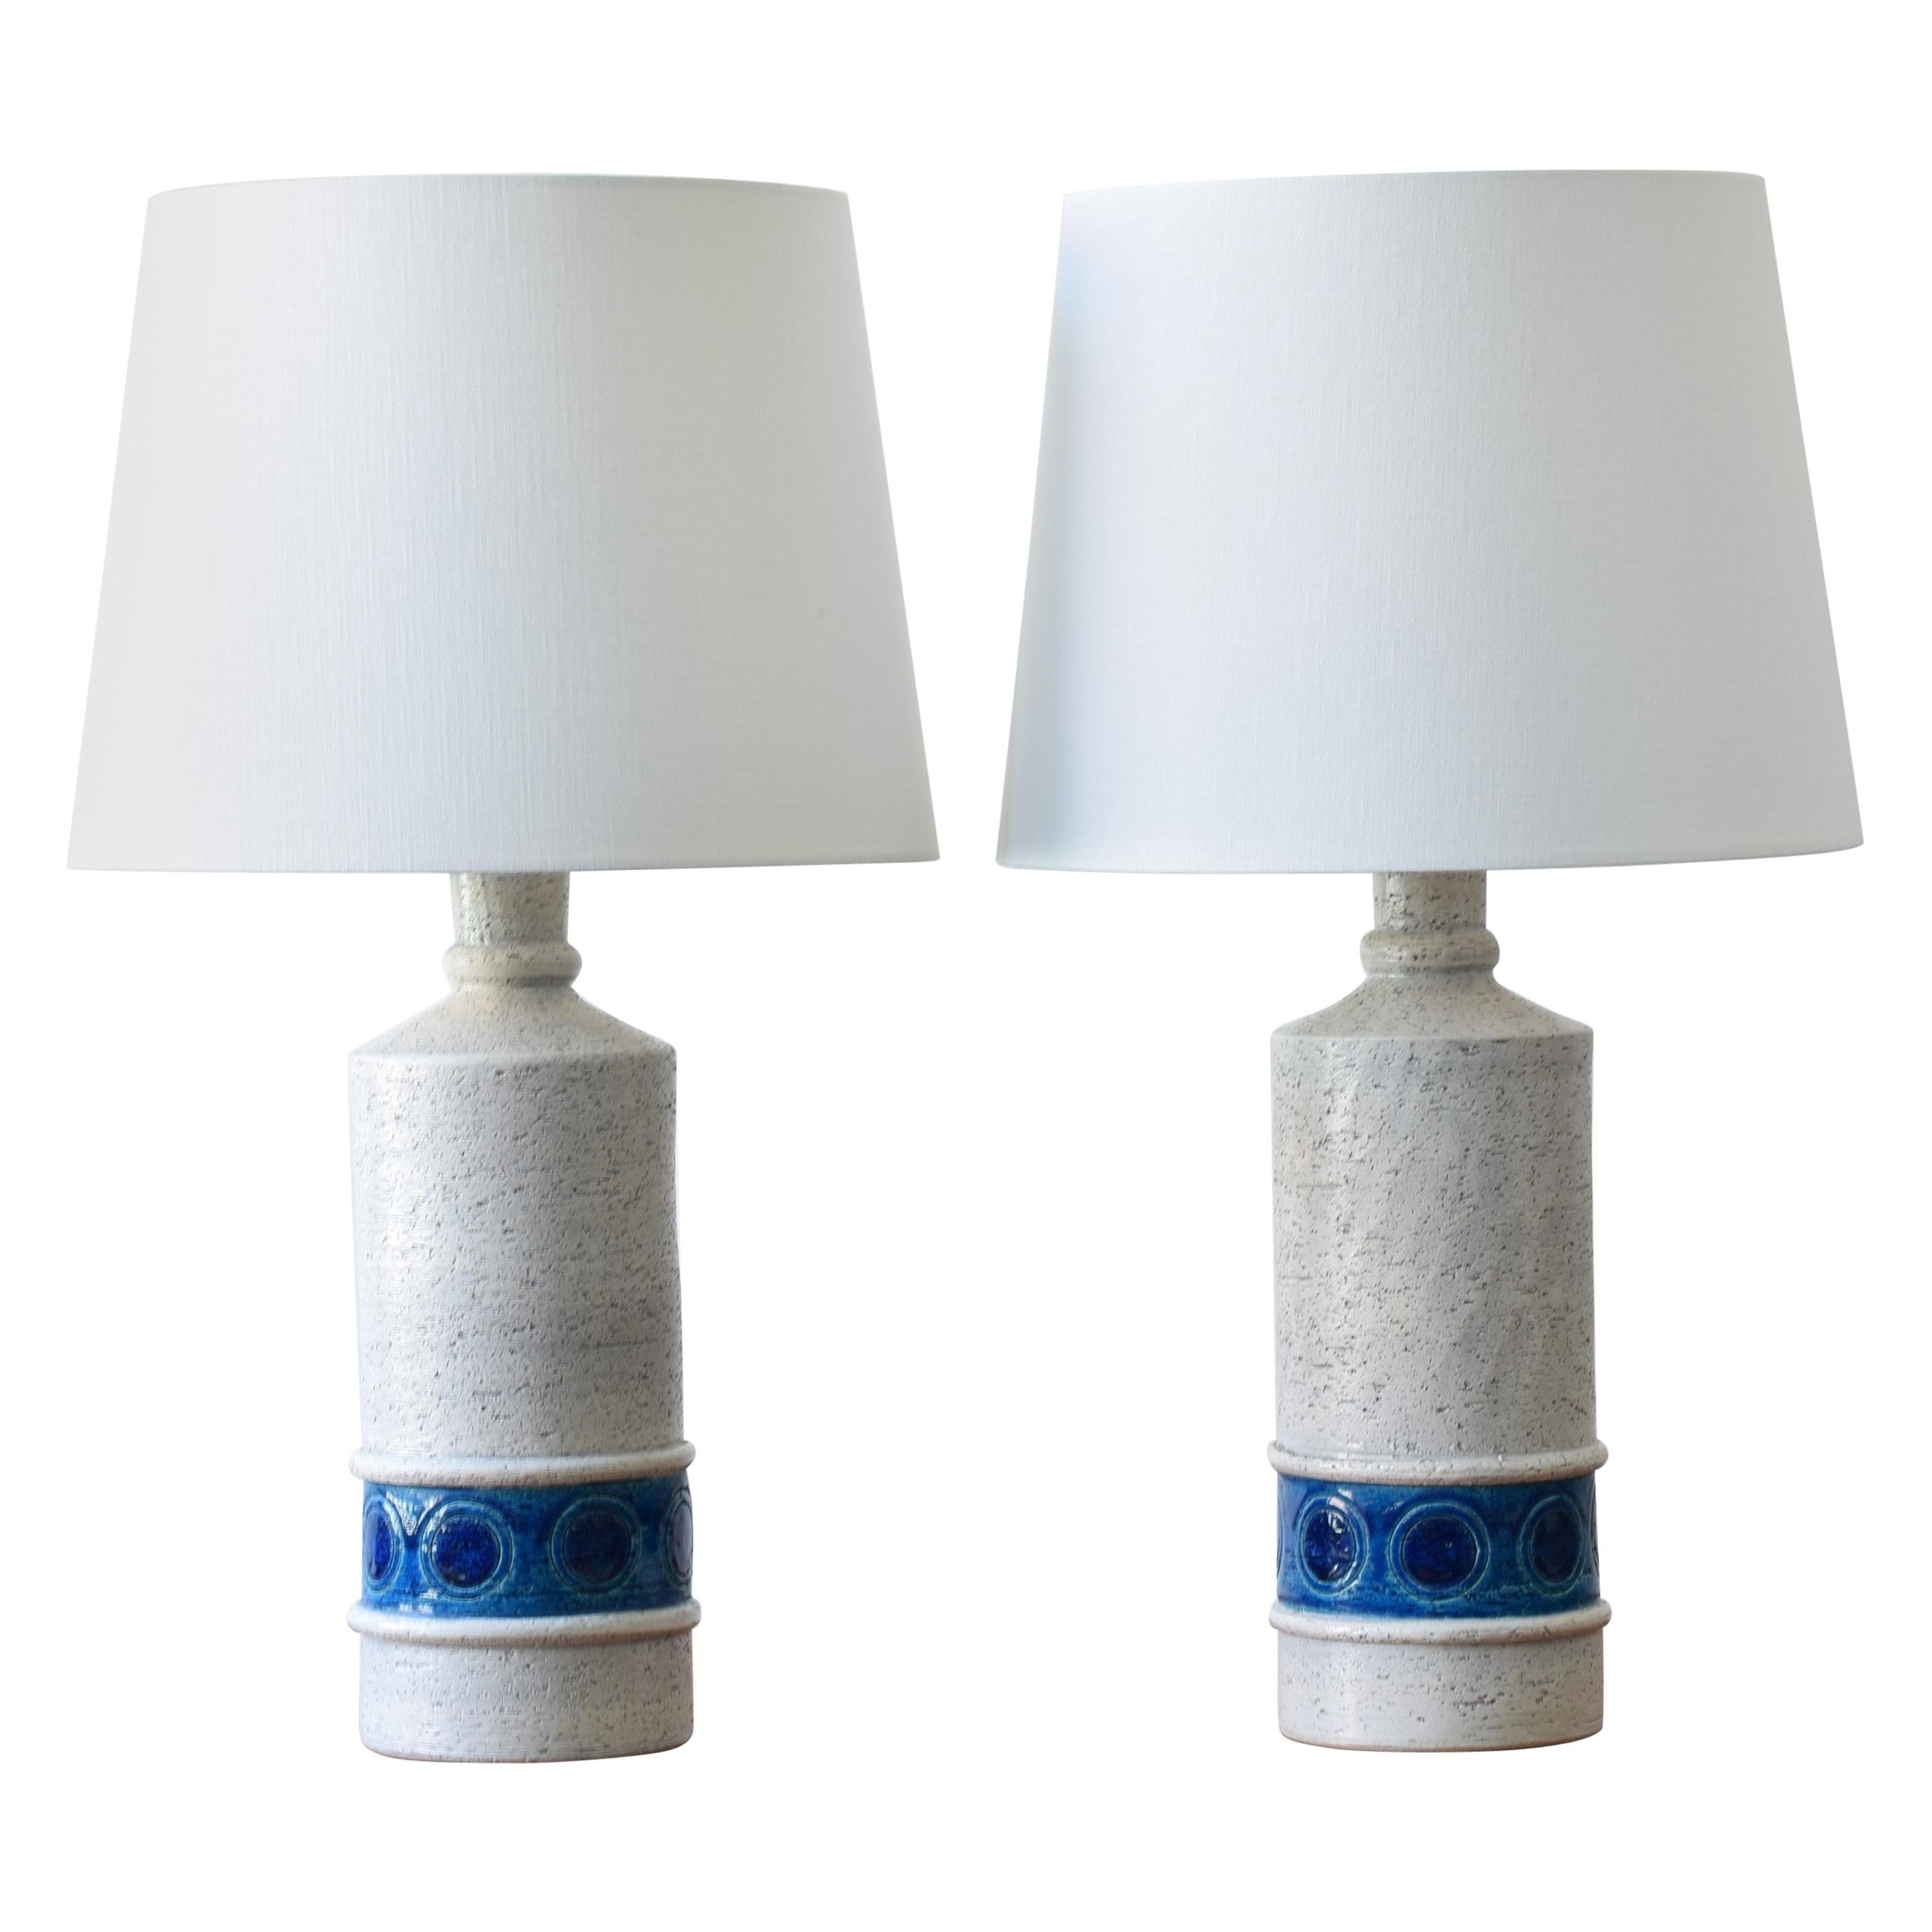 Pair of Bitossi Italy Tall Ceramic Table Lamps White and Blue with Lampshades